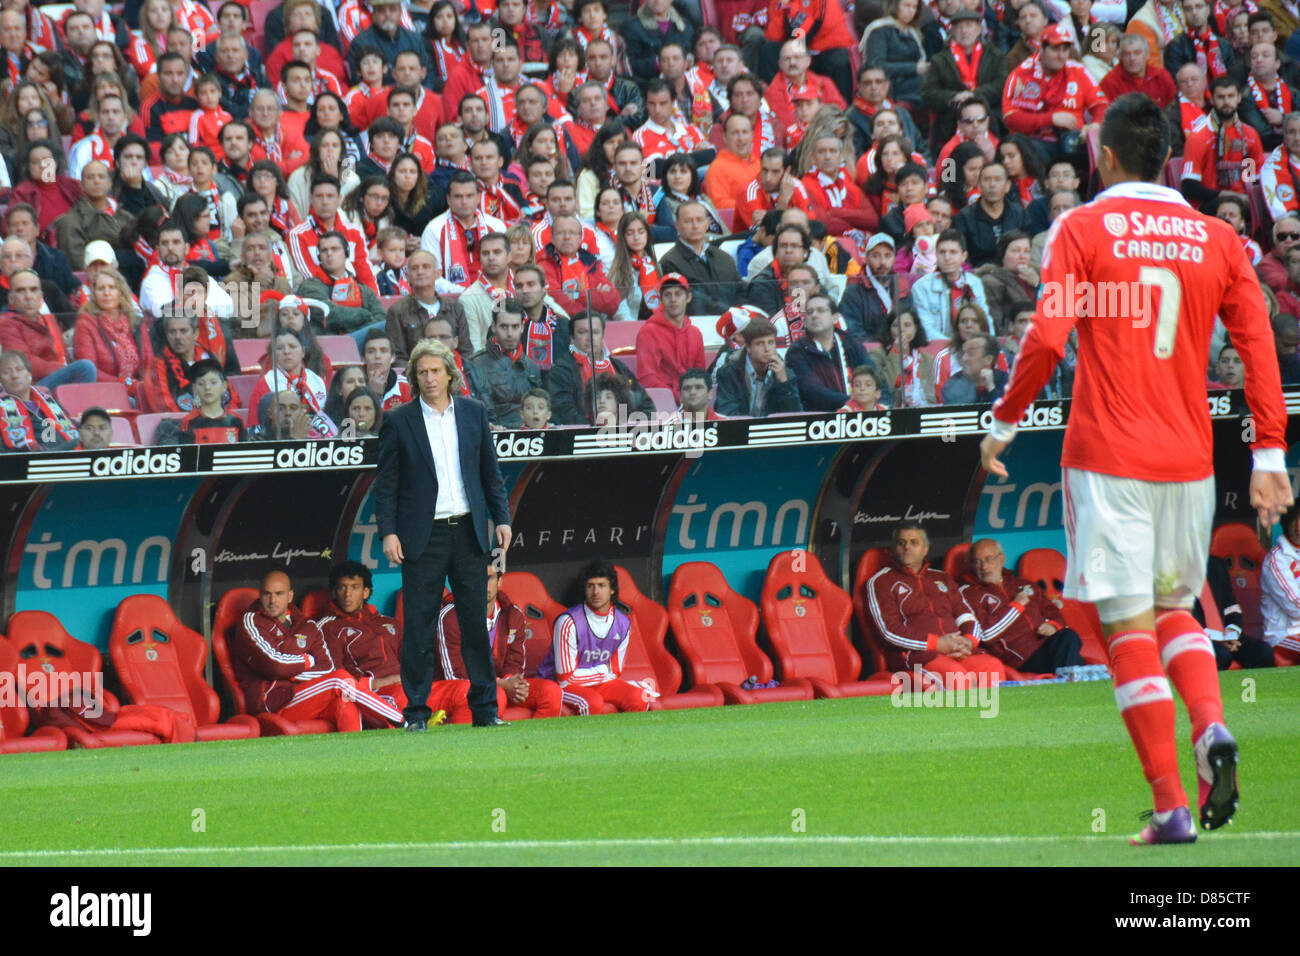 Cardozo player look to Jorge Jesus to take some directions about the game. Jorge Jesus is the Benfica«s team coach in 2012-2013 season. Stock Photo